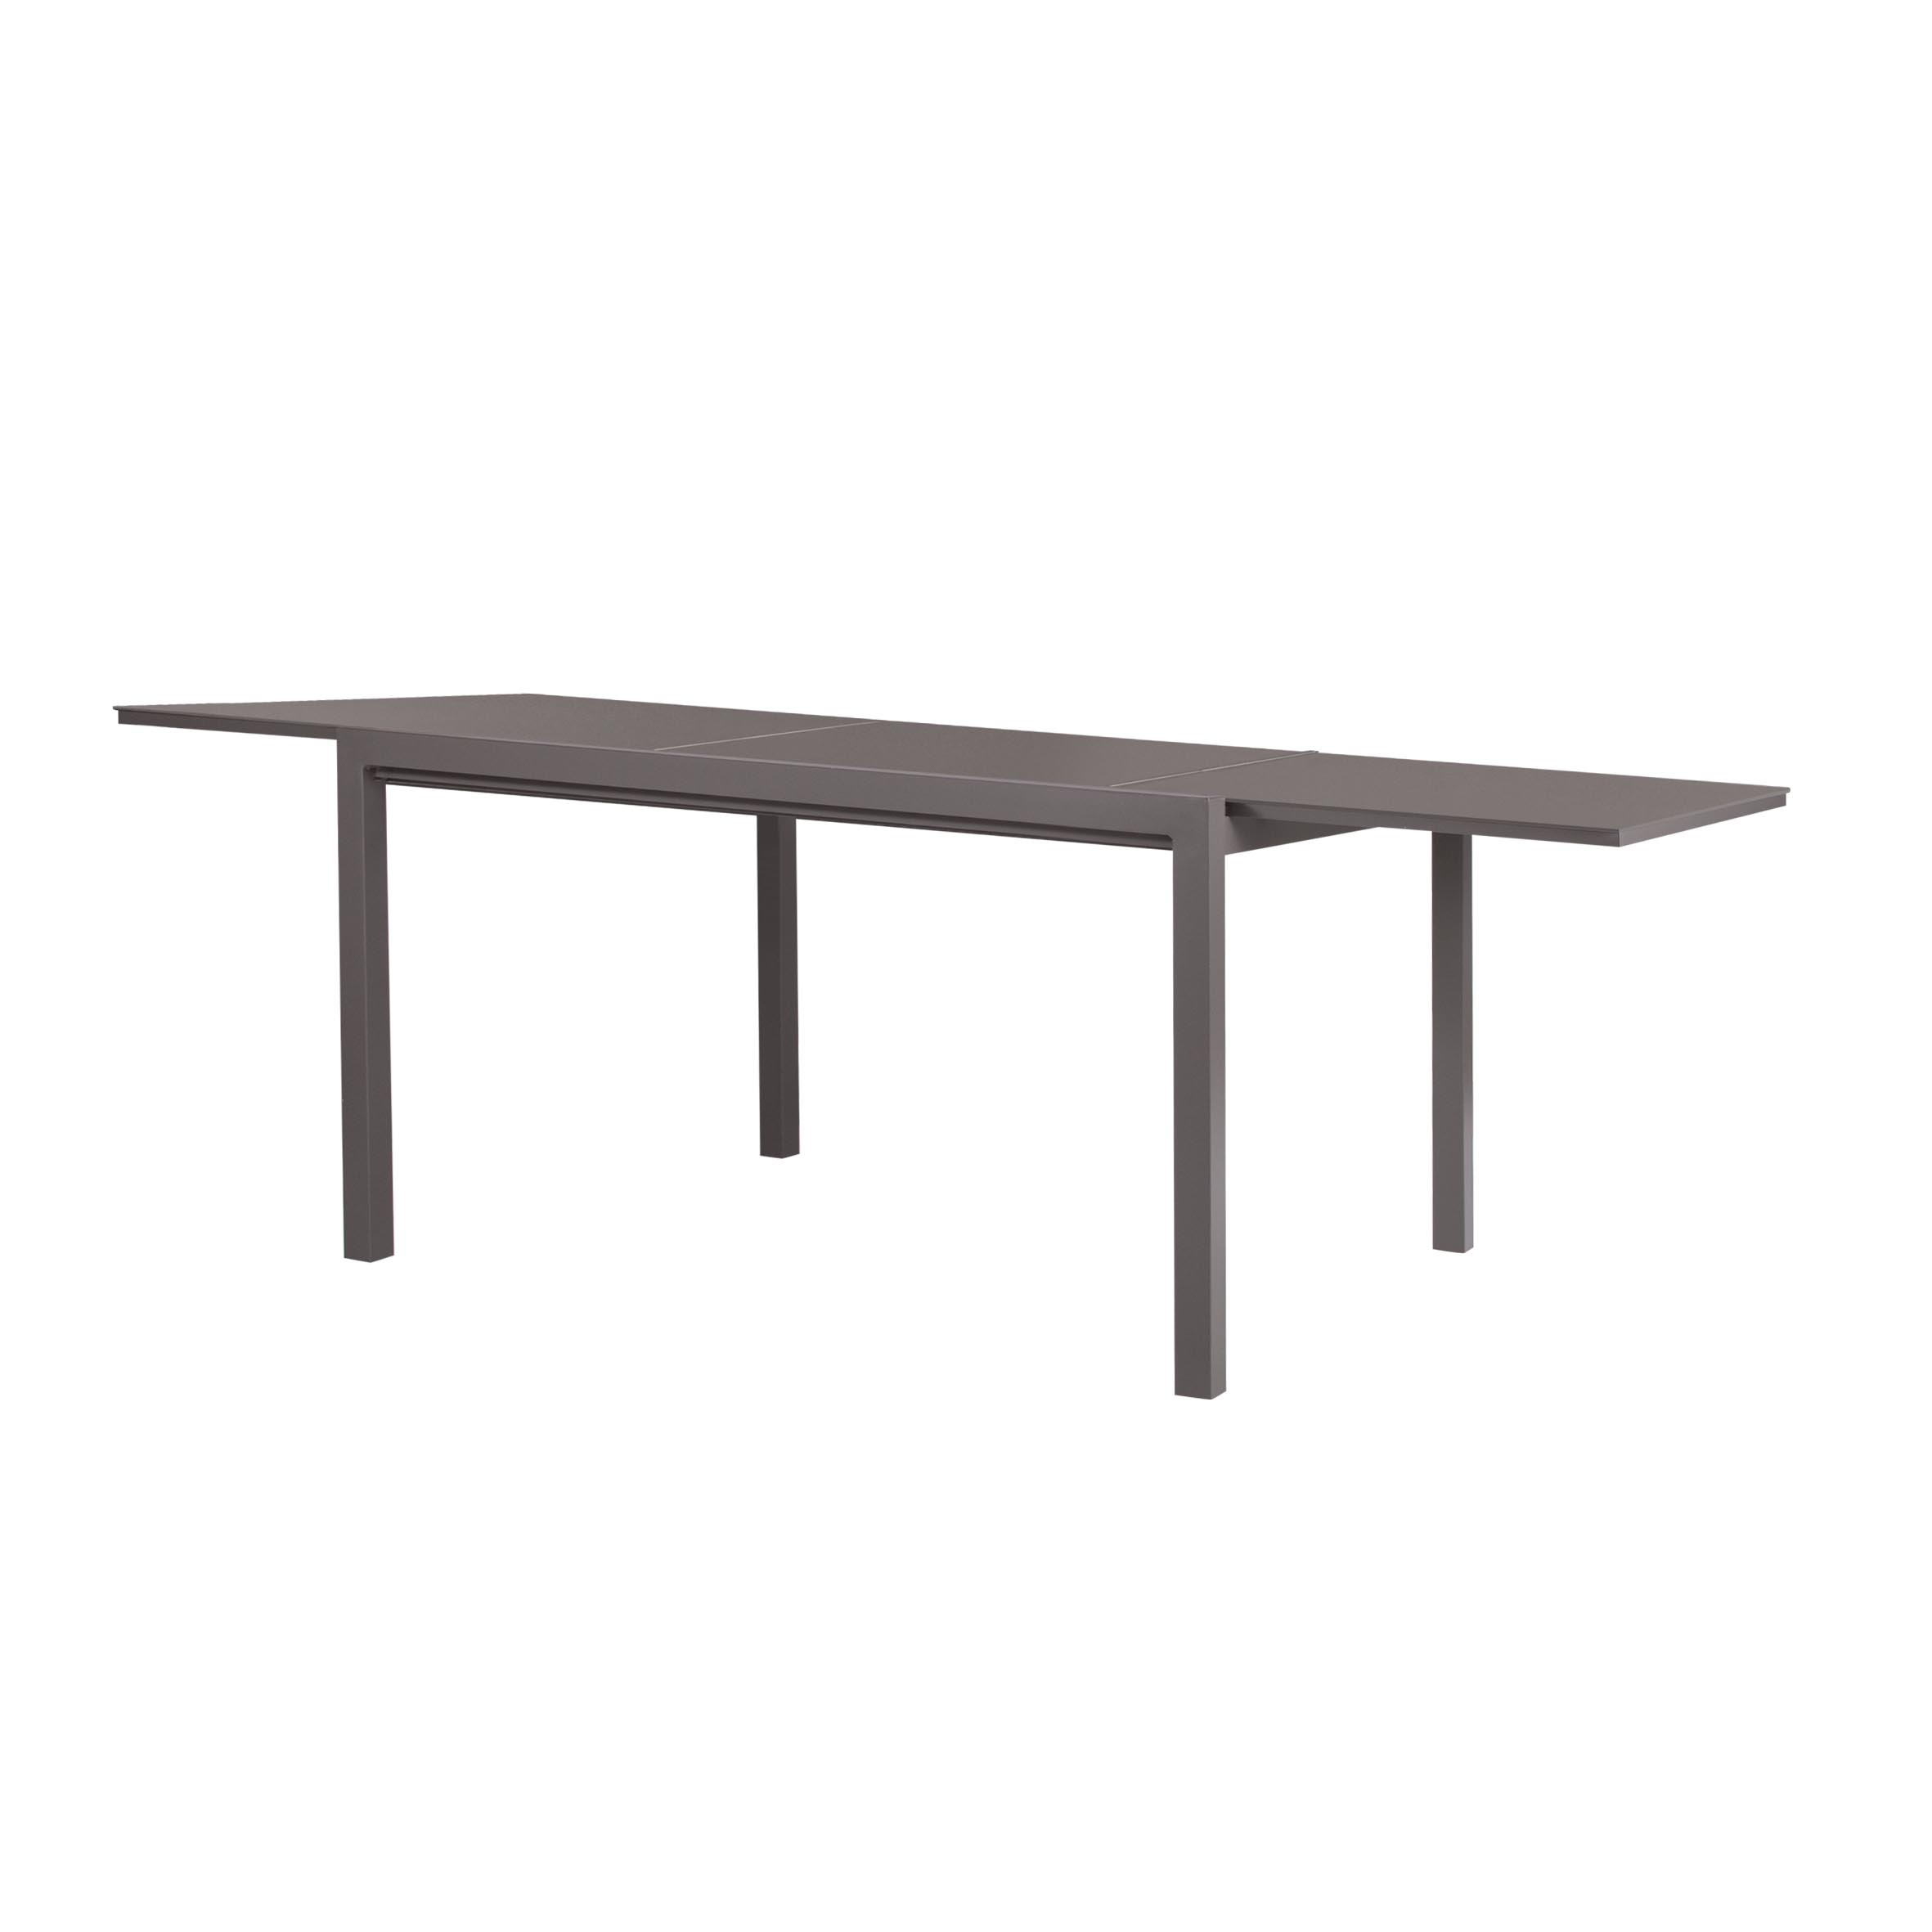 Kotka extension table S6